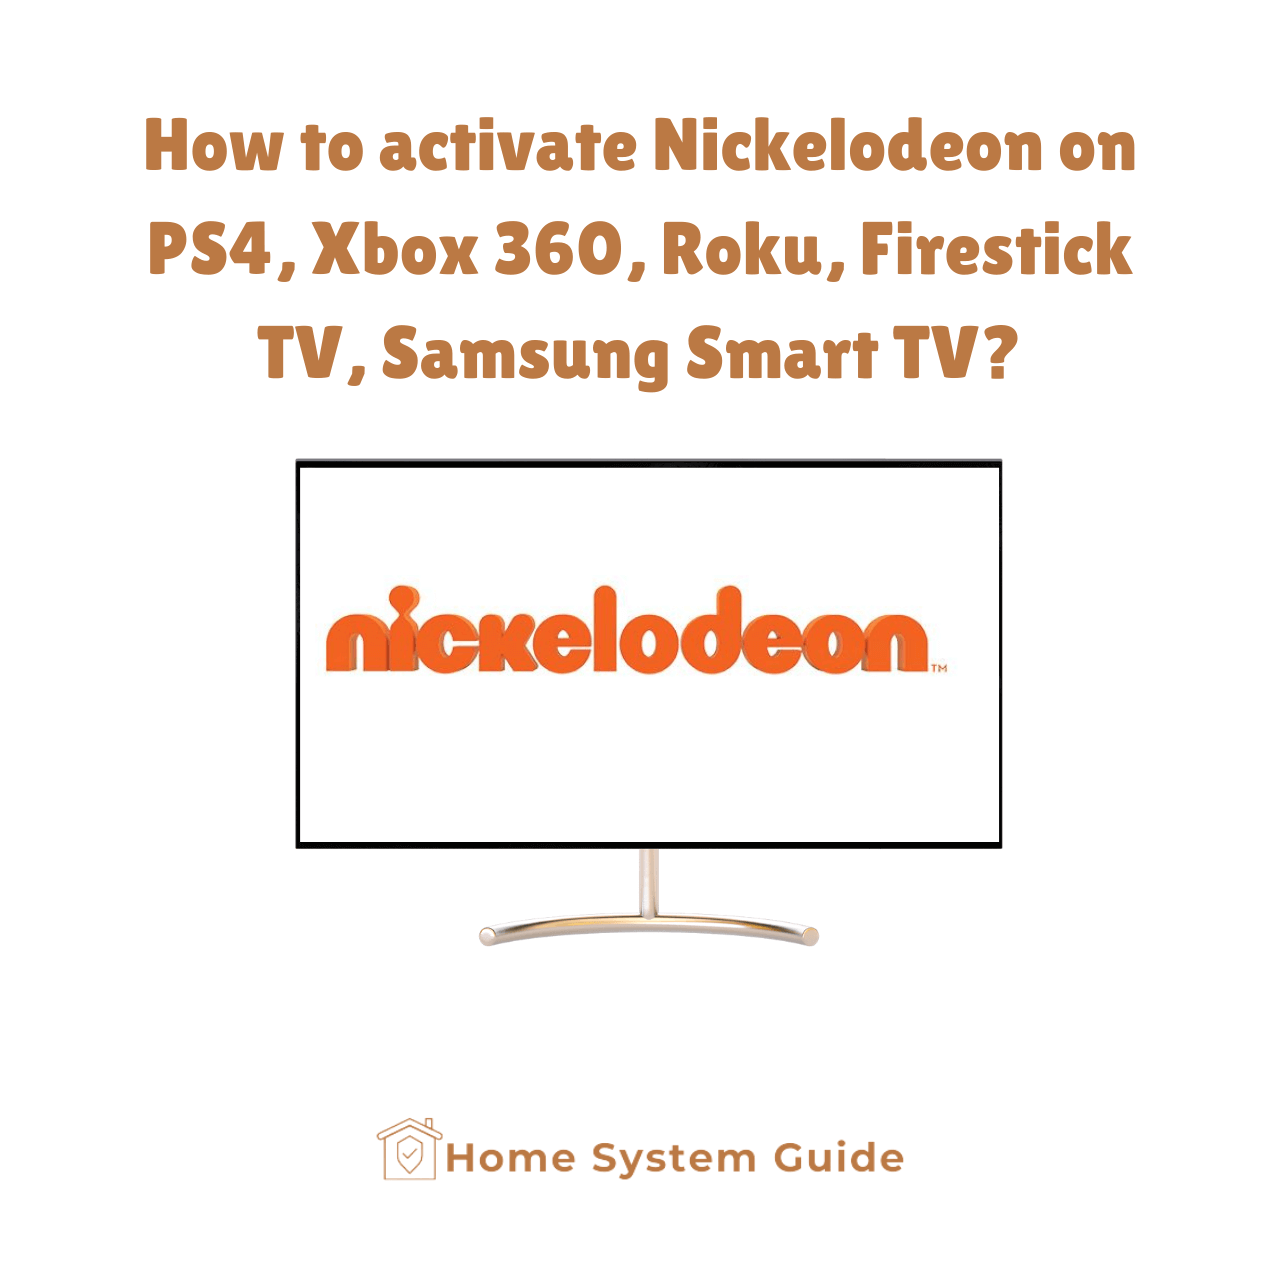 How to activate Nickelodeon on PS4, Xbox 360, Roku, Firestick TV, Samsung Smart TV